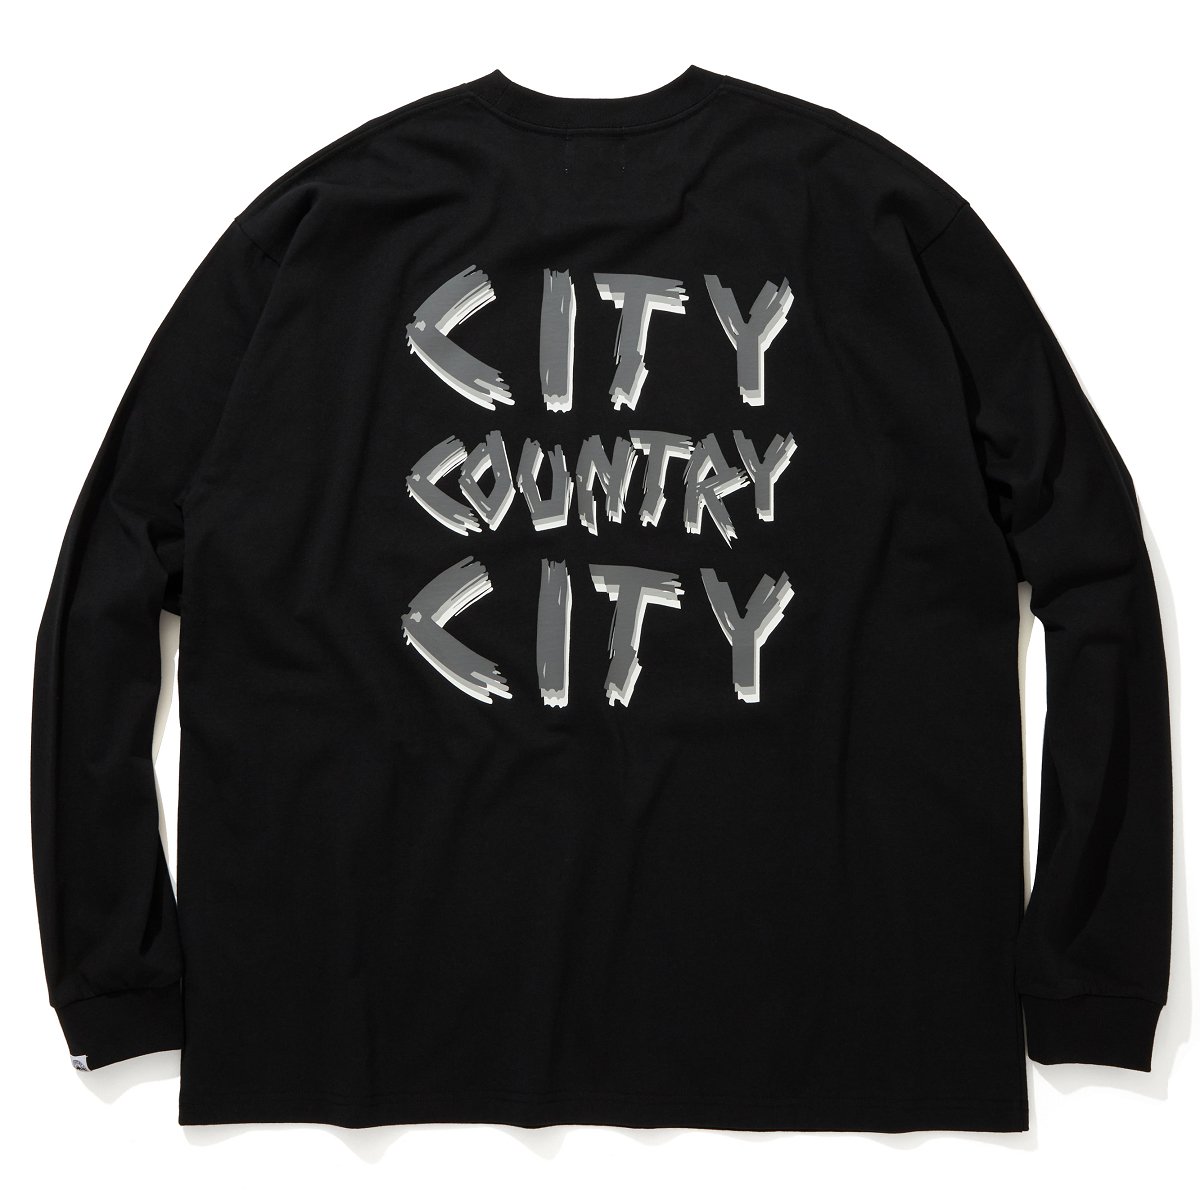 CITY COUNTRY CITY<BR>COTTON L/S T-SHIRT"CITY COUNTRY CITY"(BLACK)